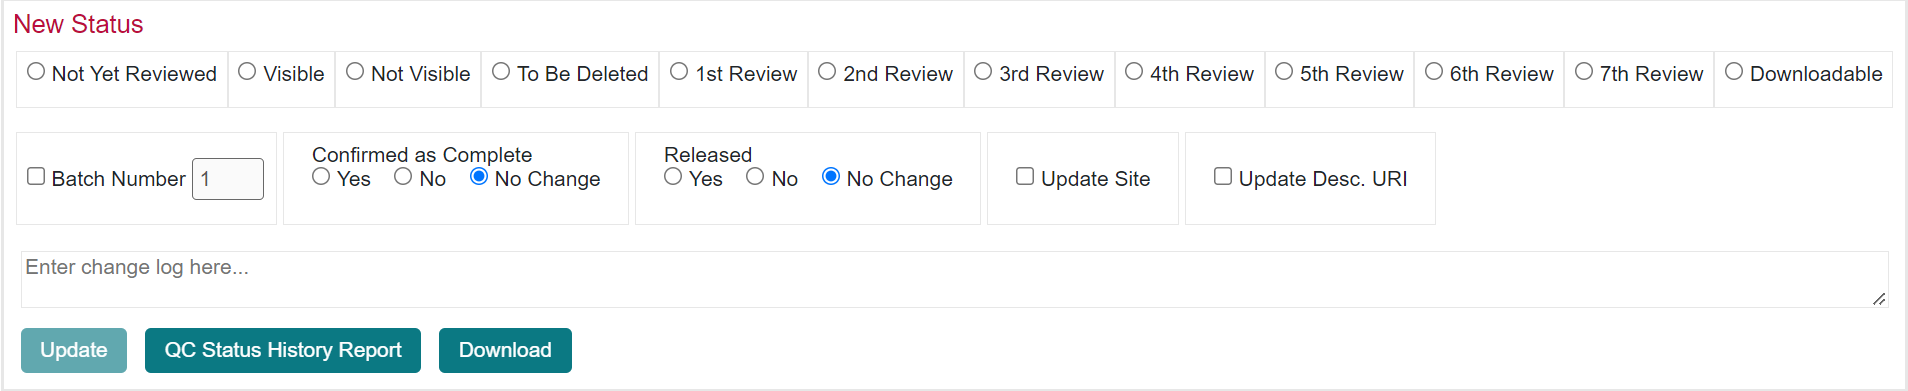 New Status section of the Perform Quality Control page. Options exist for selecting the specific status, batch number, confirmed as complete, released, and change log. Buttons below include Update, QC Status History Report, and Download.